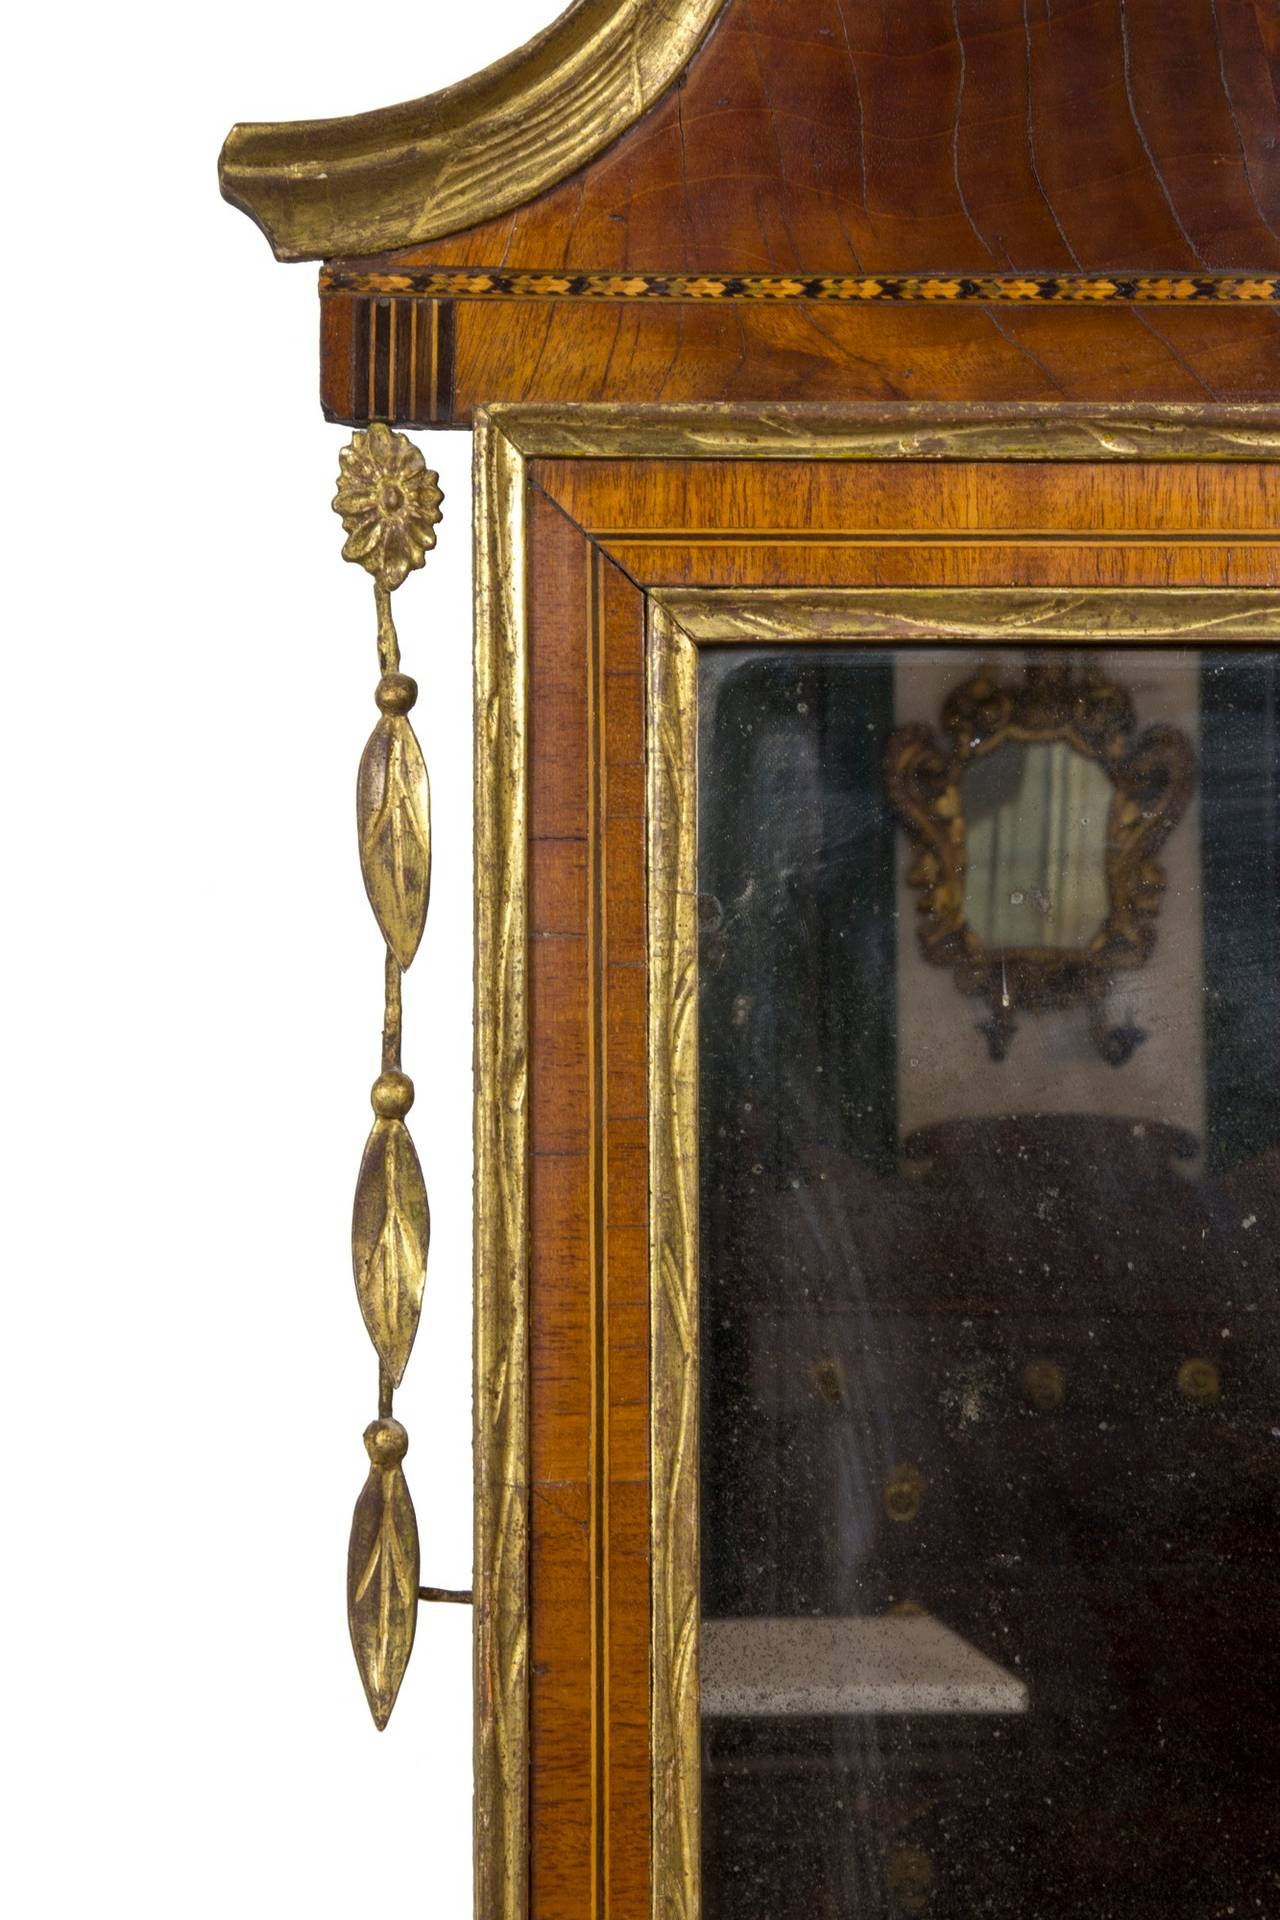 This mirror, retaining its early glass, is in a fine state of preservation and is complete in all its parts. These mirrors are very delicate and often lose their embellishments. The surface is old and has a rich, warm feel. The gold leafing is all